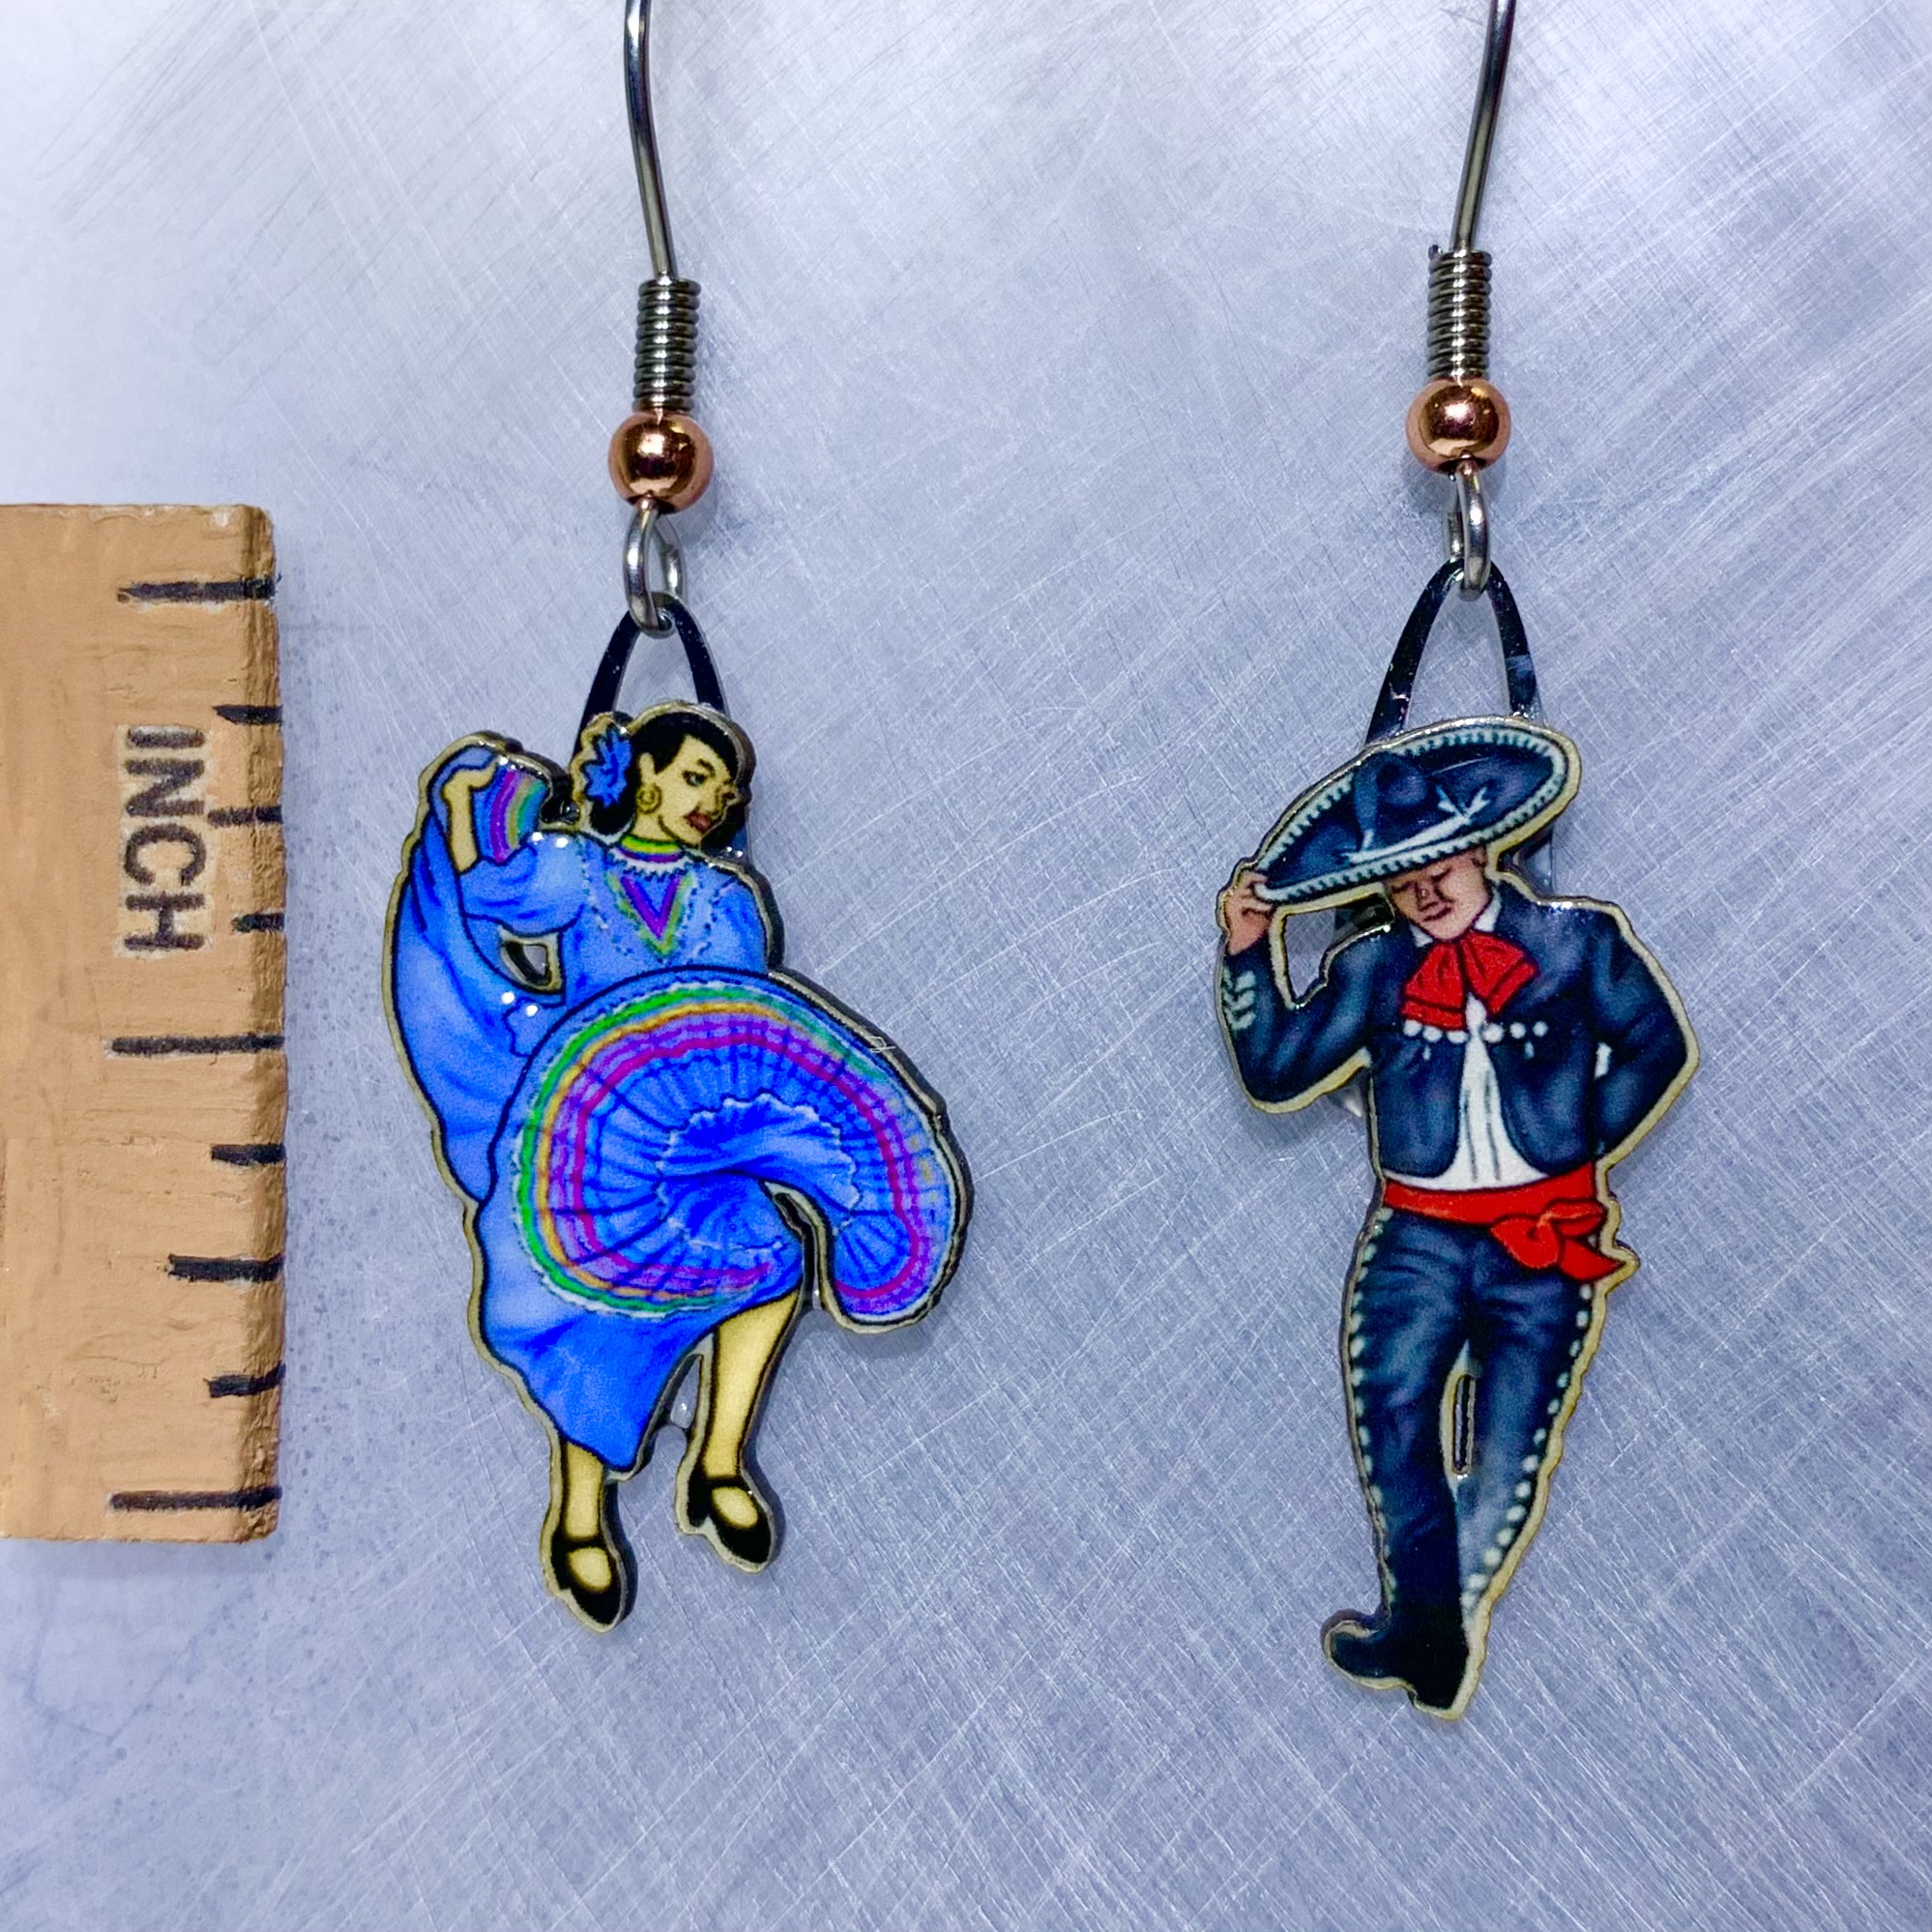 Picture shown is of 1 inch tall pair of earrings of Blue Folklorico.